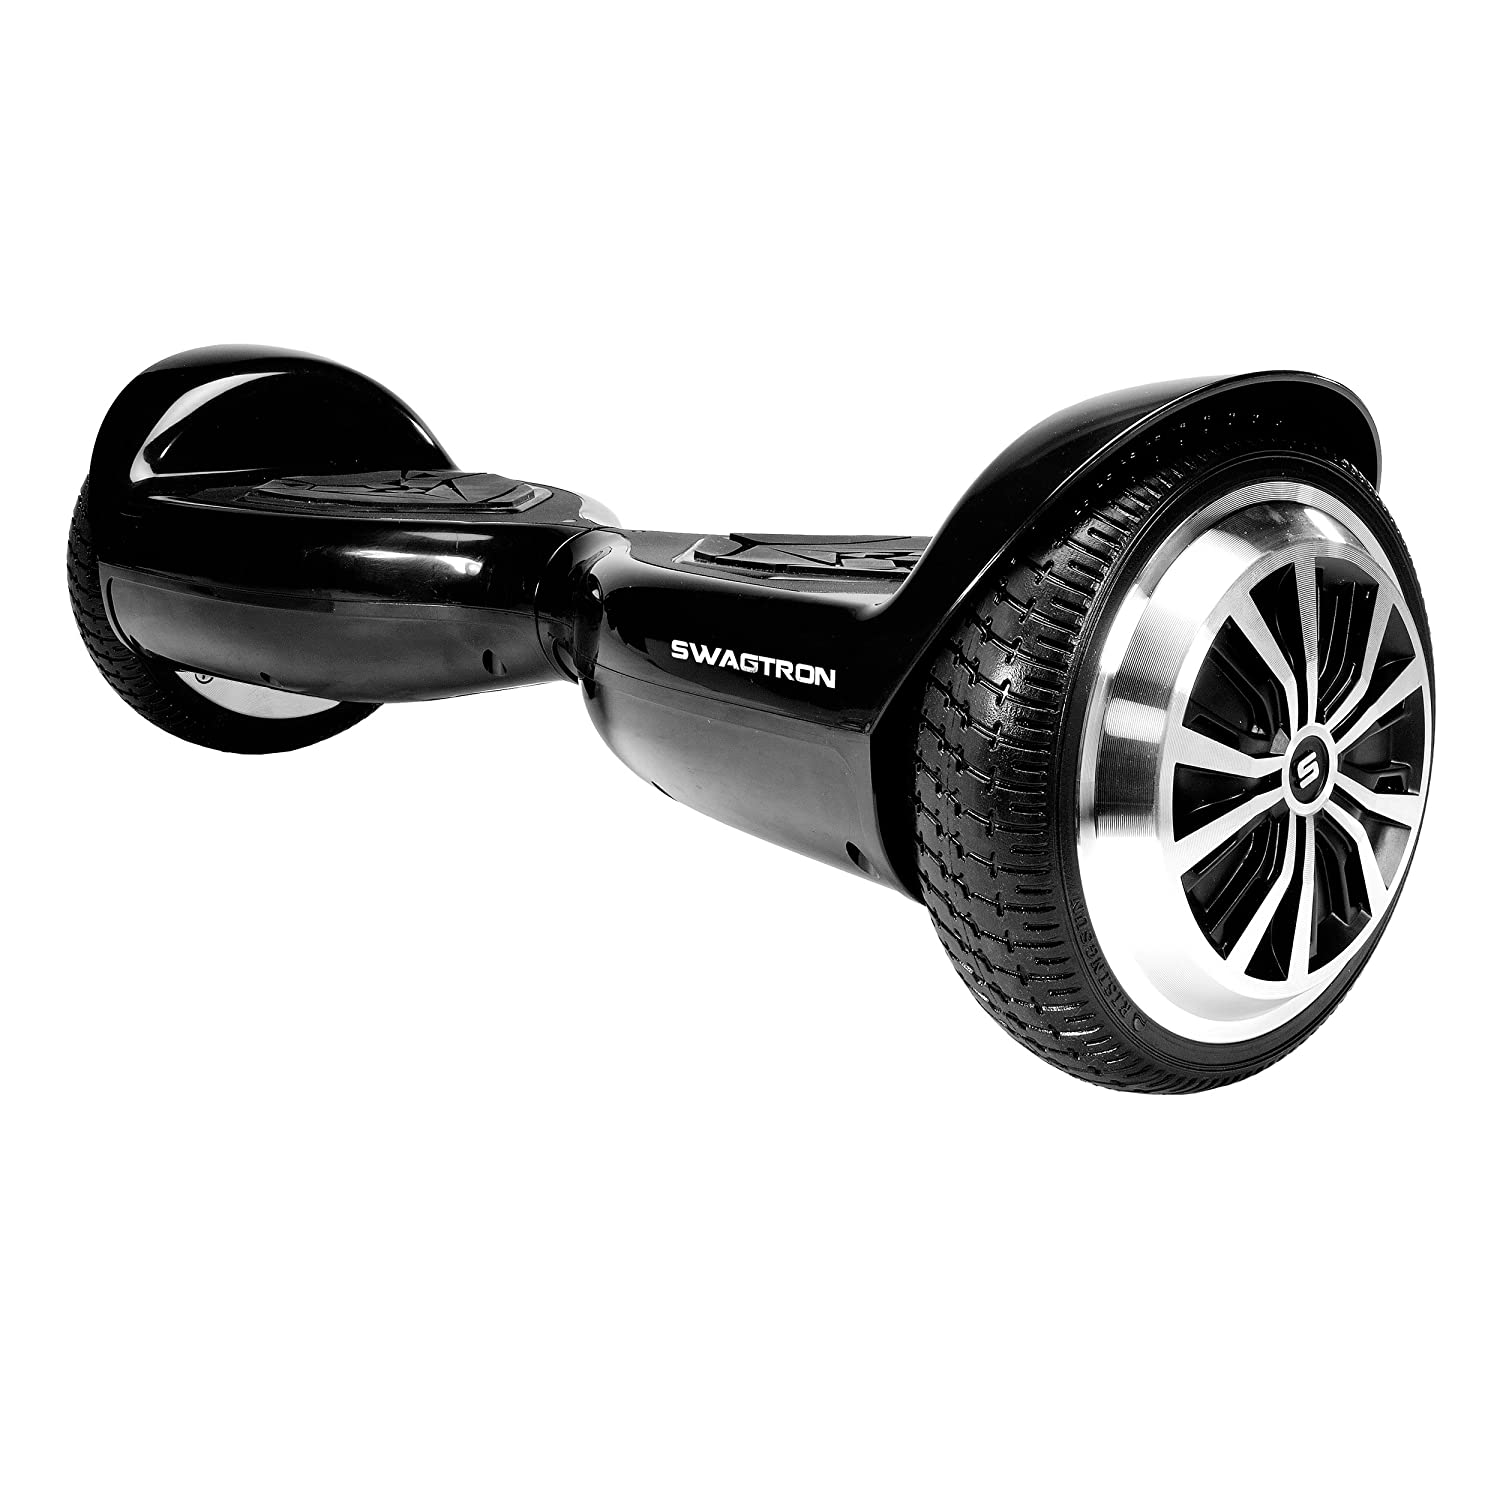 Swagtron Swagboard T5 Entry Level Hoverboard for Kids